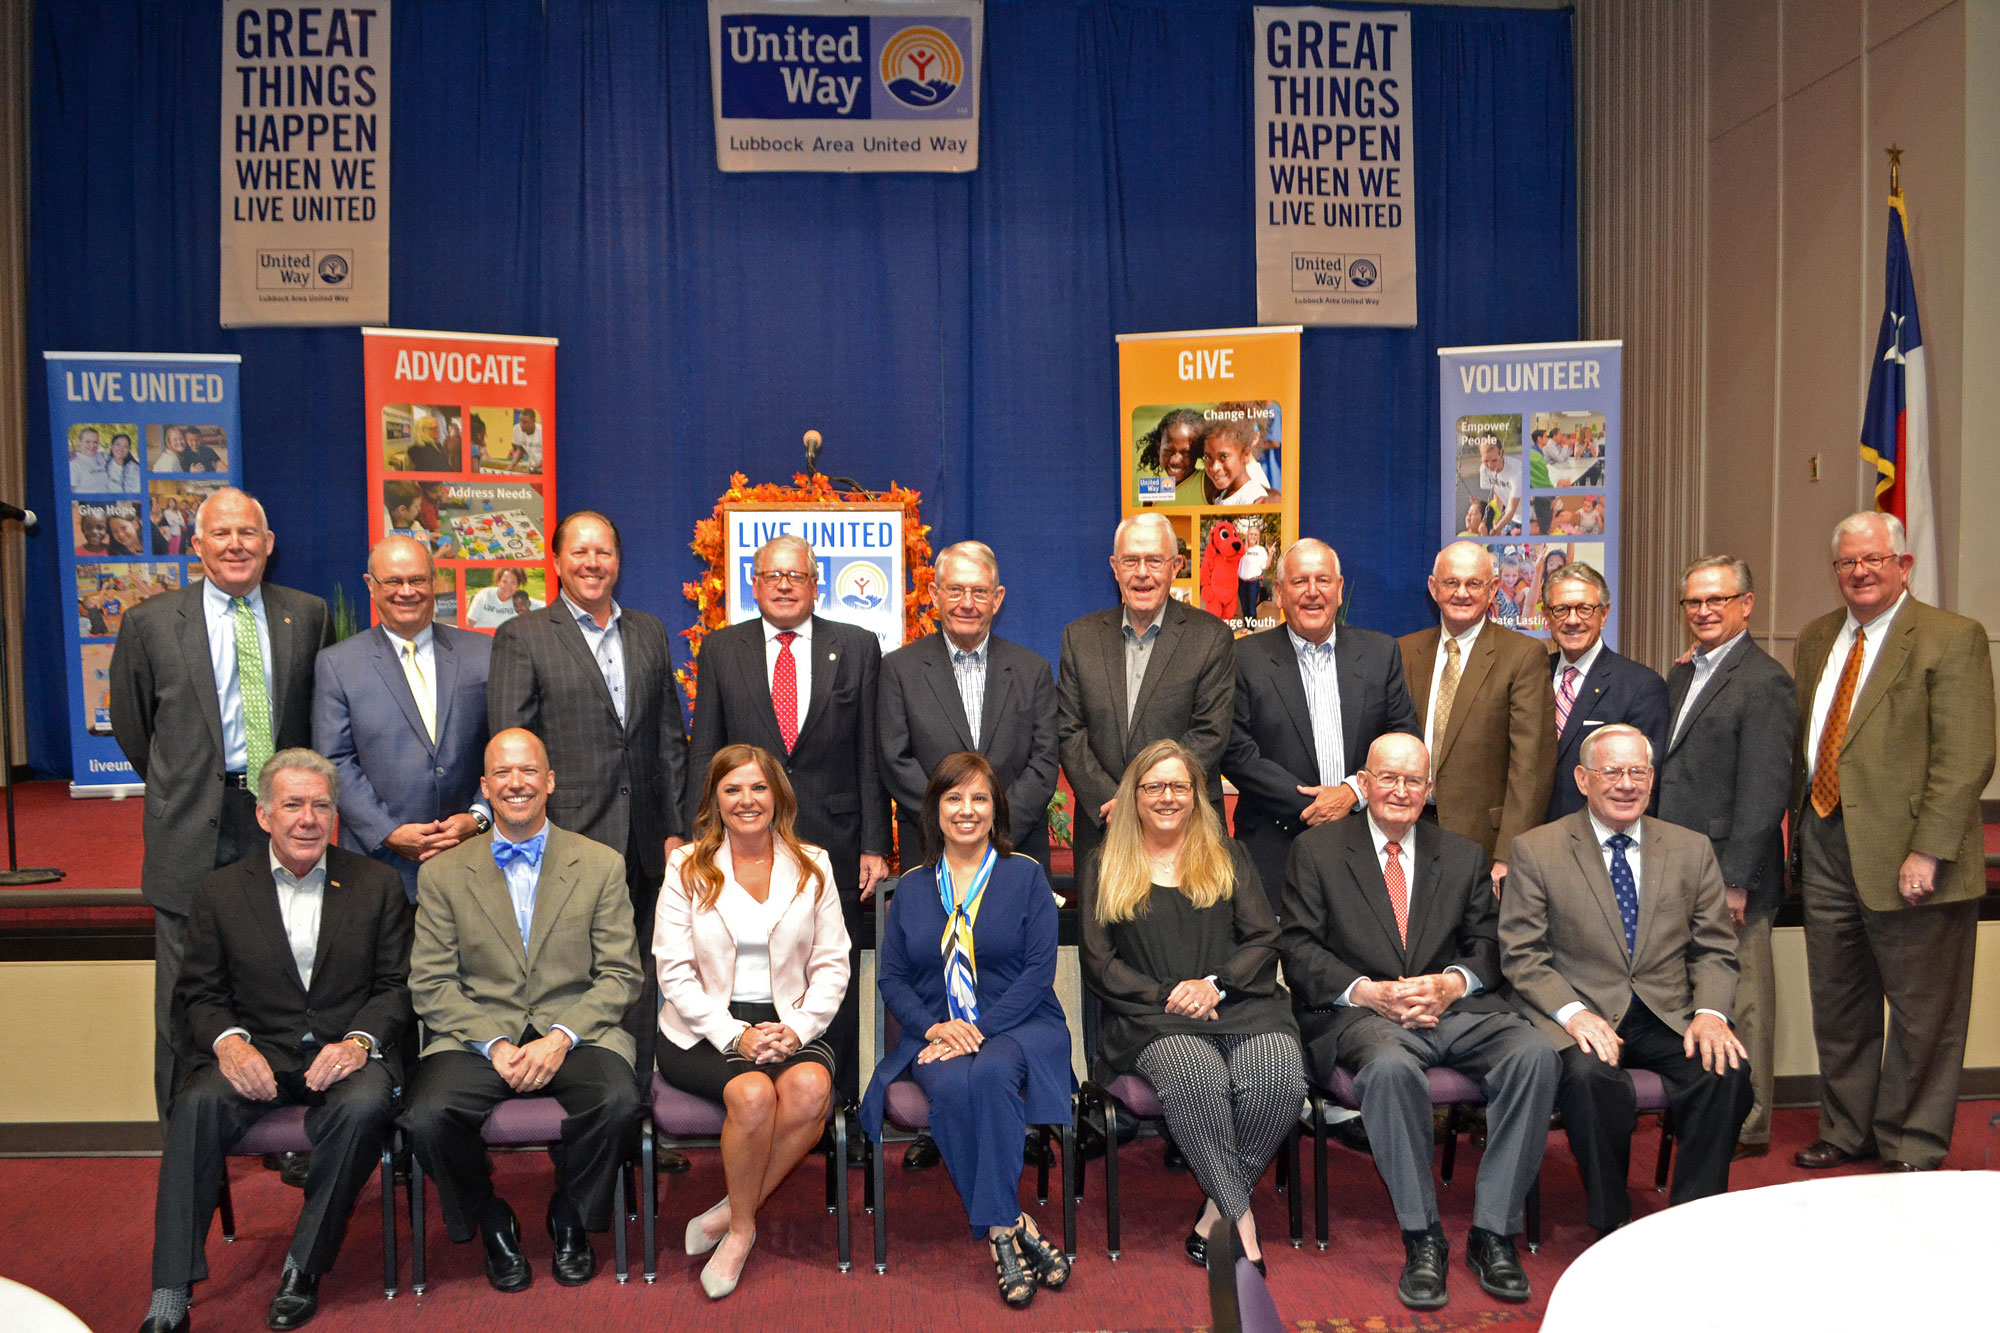 Current and former Campaign Chairs representing nearly 50 years of United Way history.